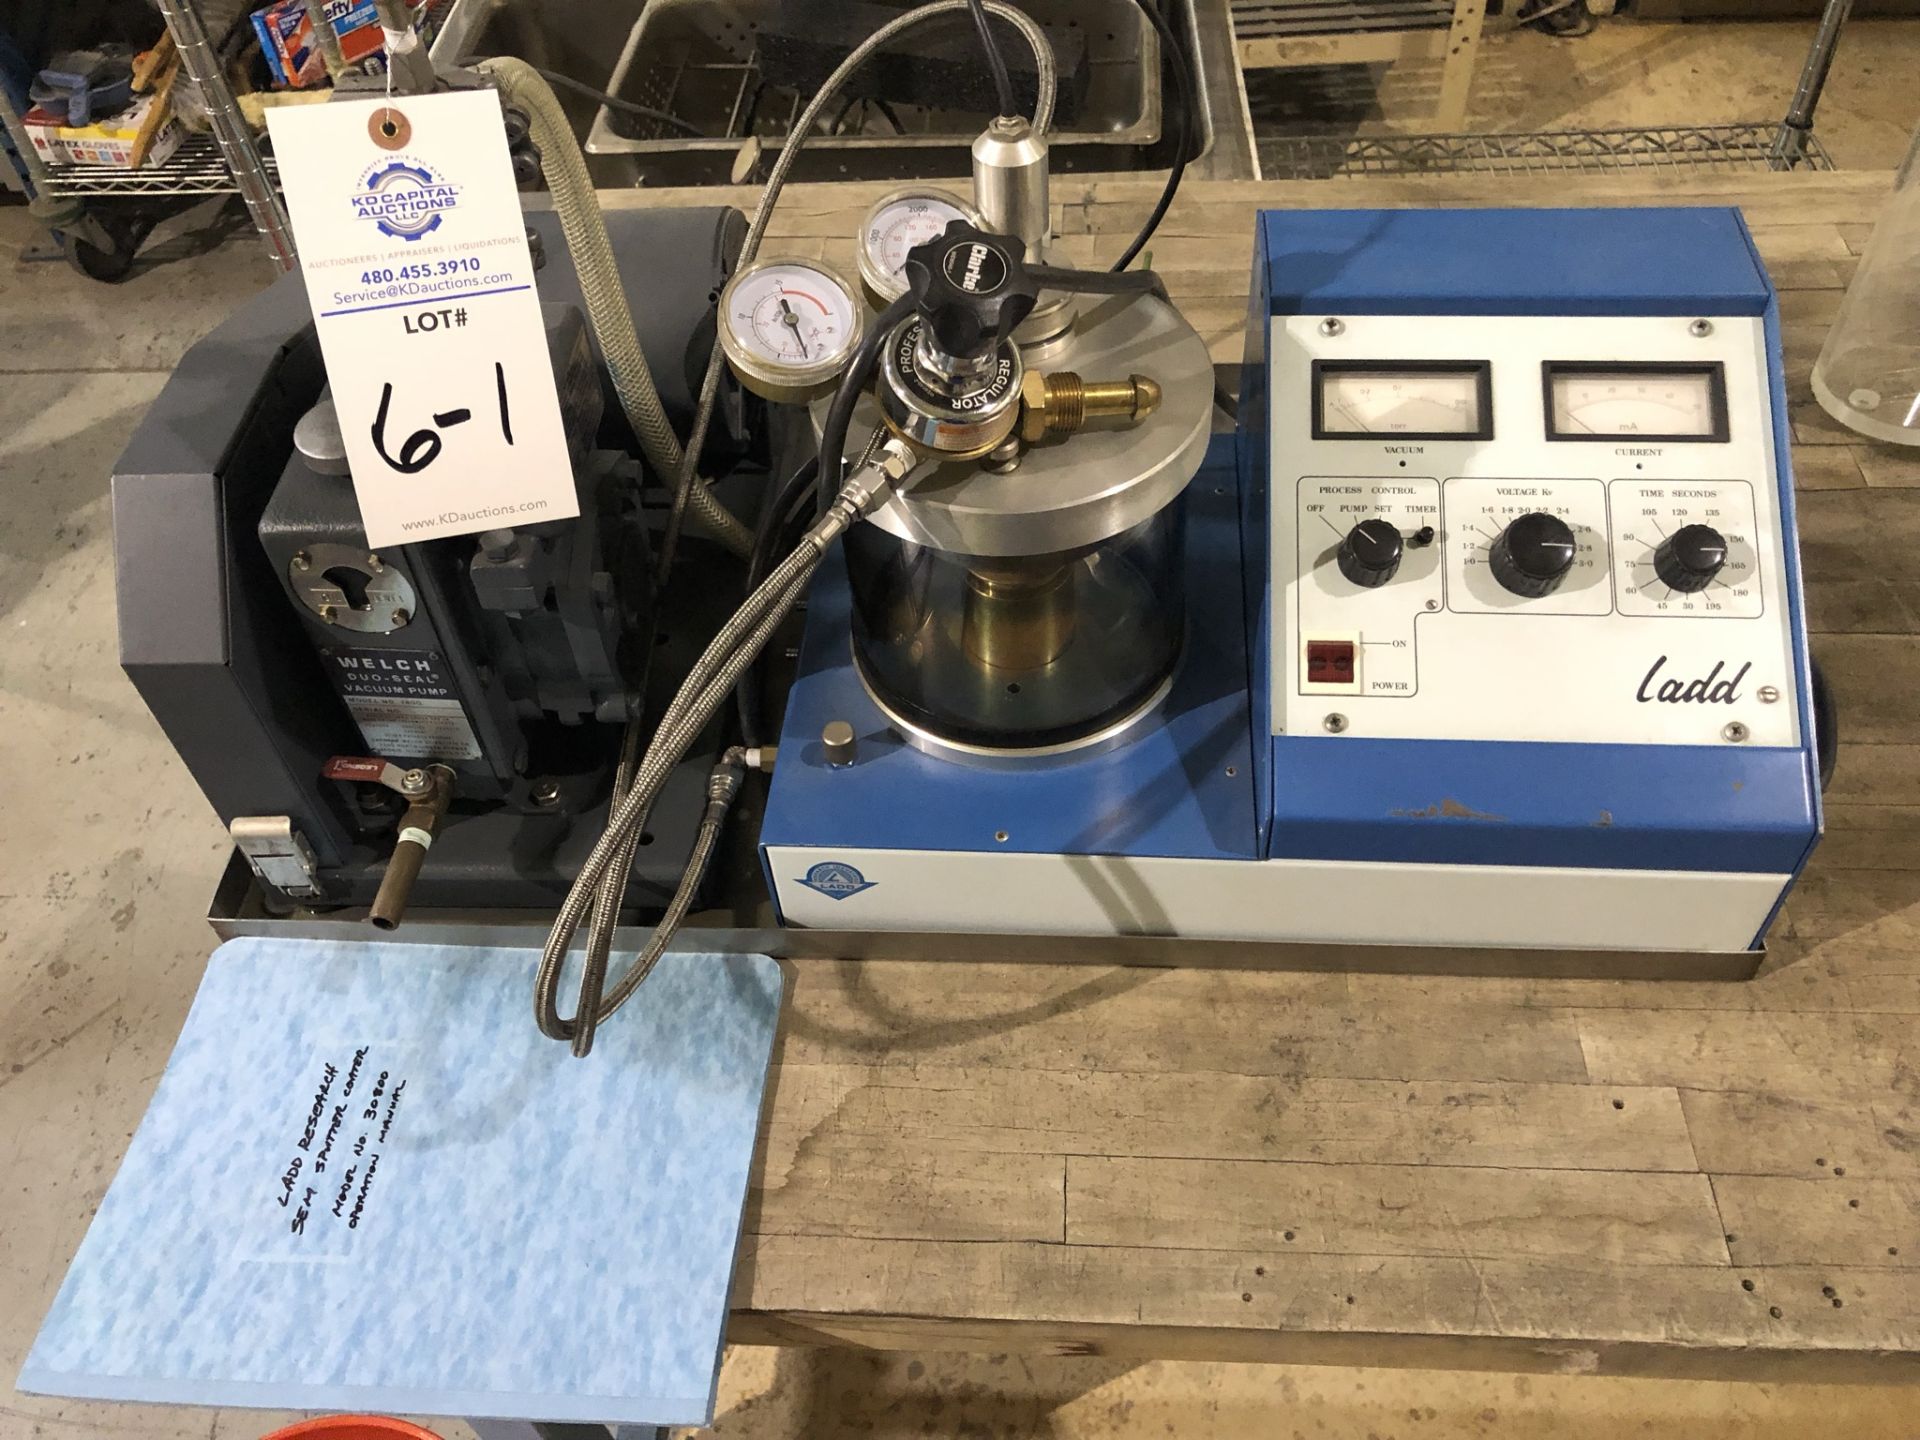 Ladd Sputter Coater for SEM sample preparation, Welch 1400 Duo Seal two stage vacuum pump